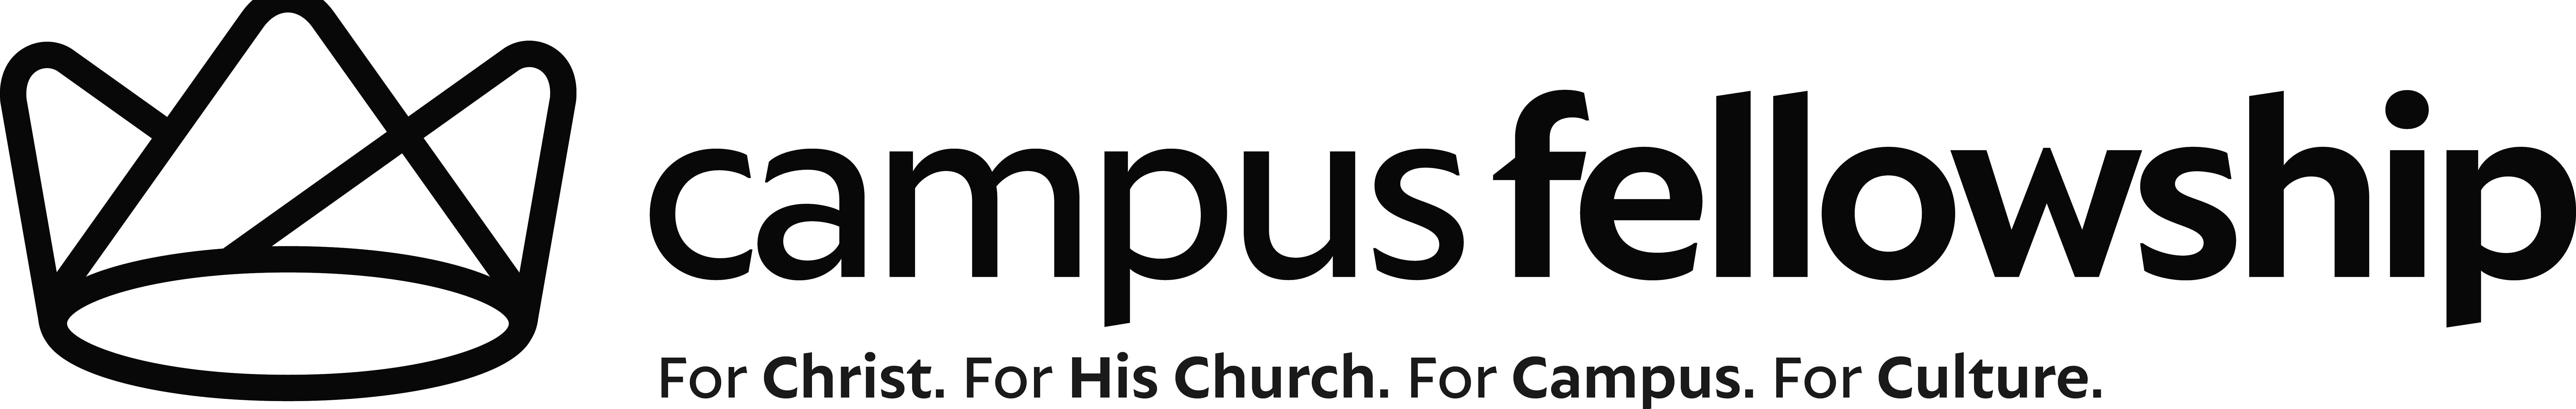 Students for Campus Fellowship Header